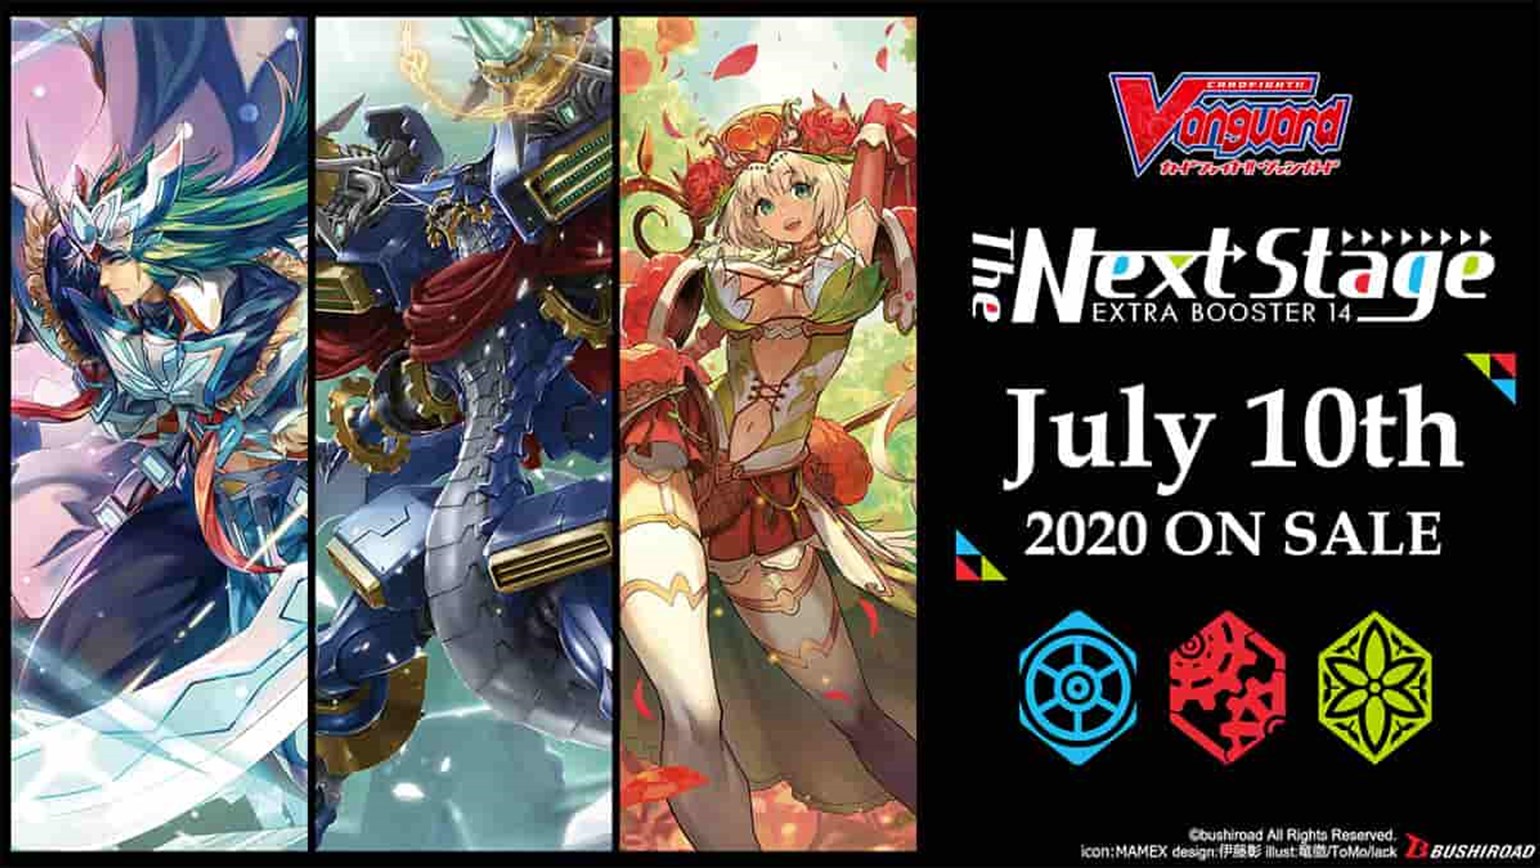 English Edition Cardfight!! Vanguard Extra Booster 14: The Next Stage Coming July 10th